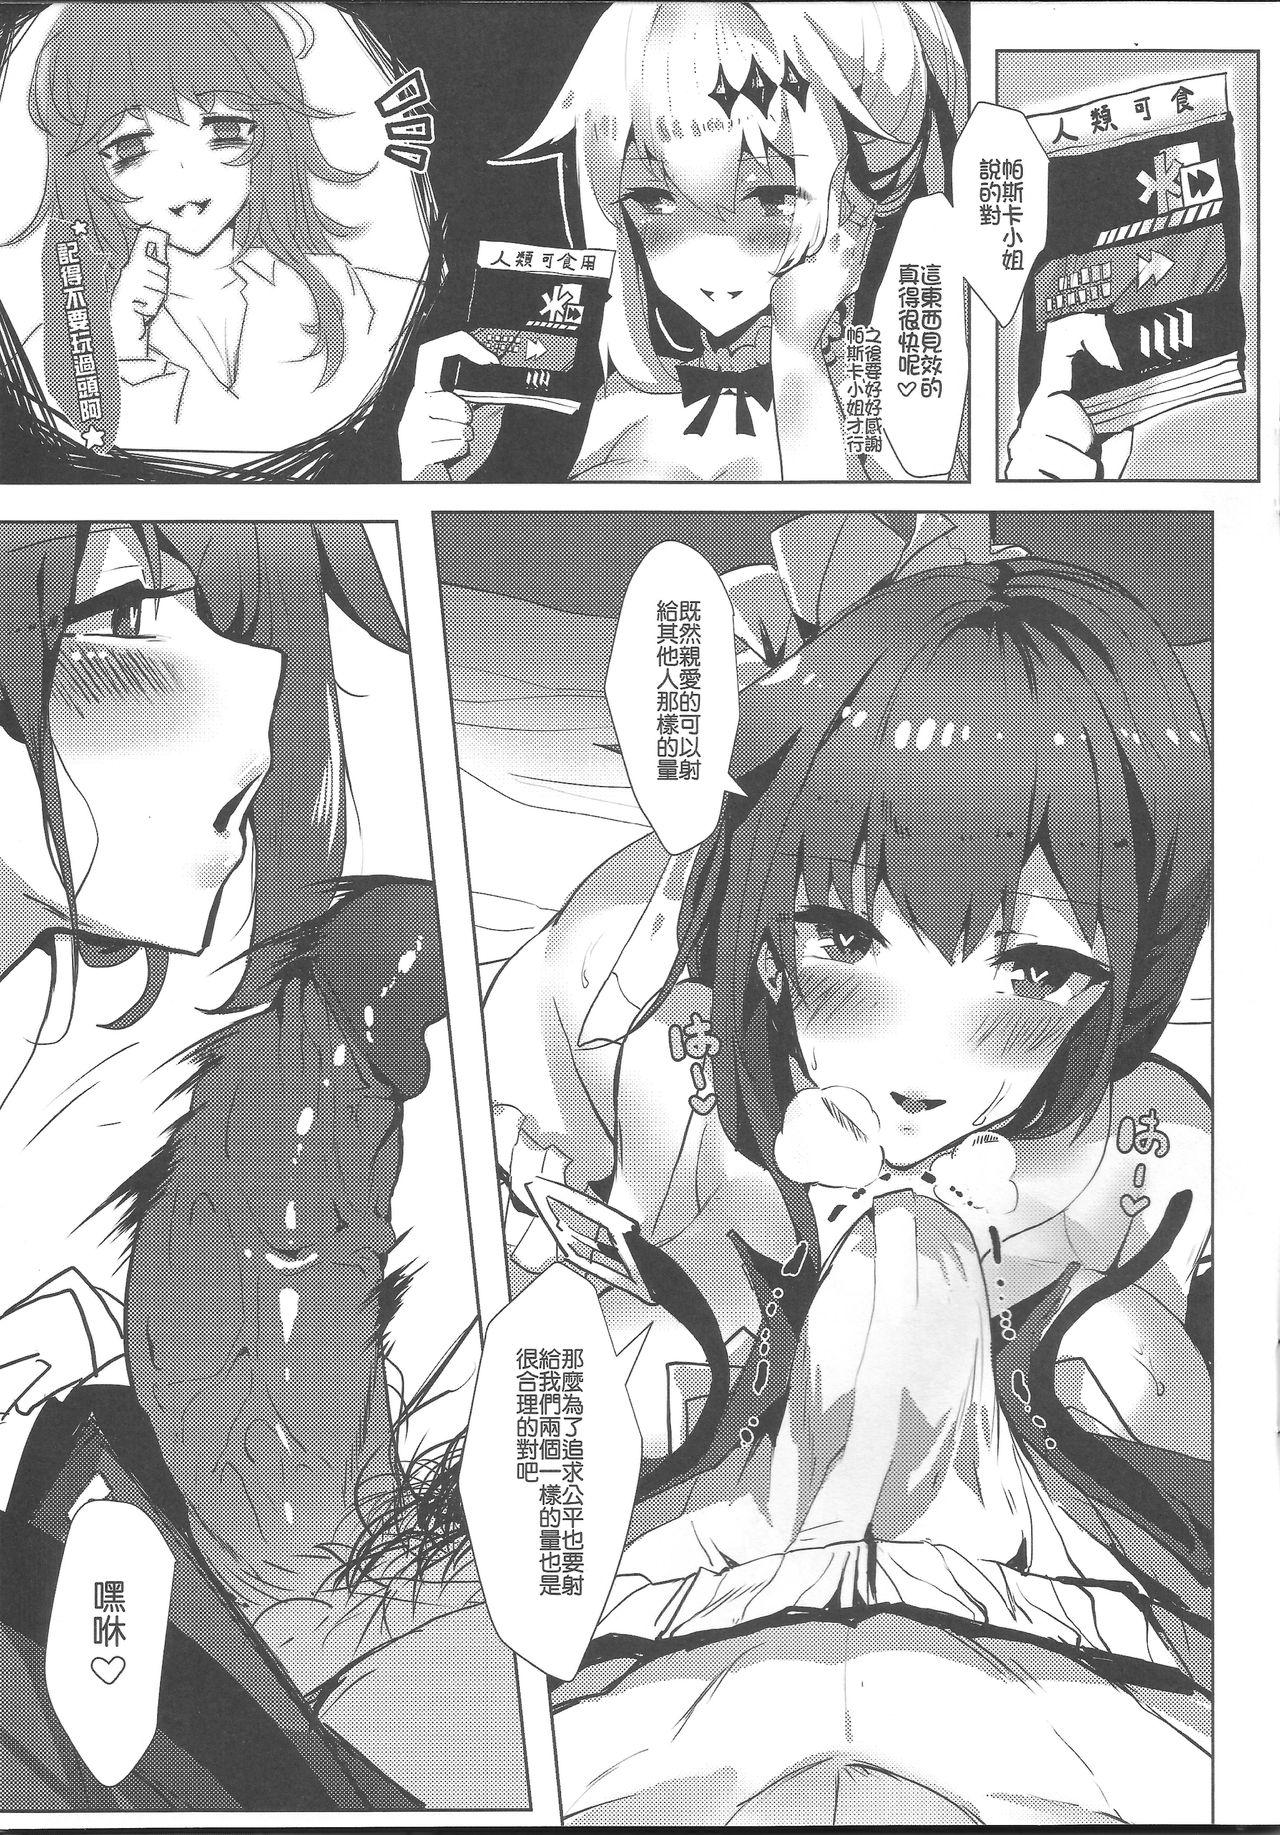 Curious FN`s Special Marking - Girls frontline Cute - Page 12